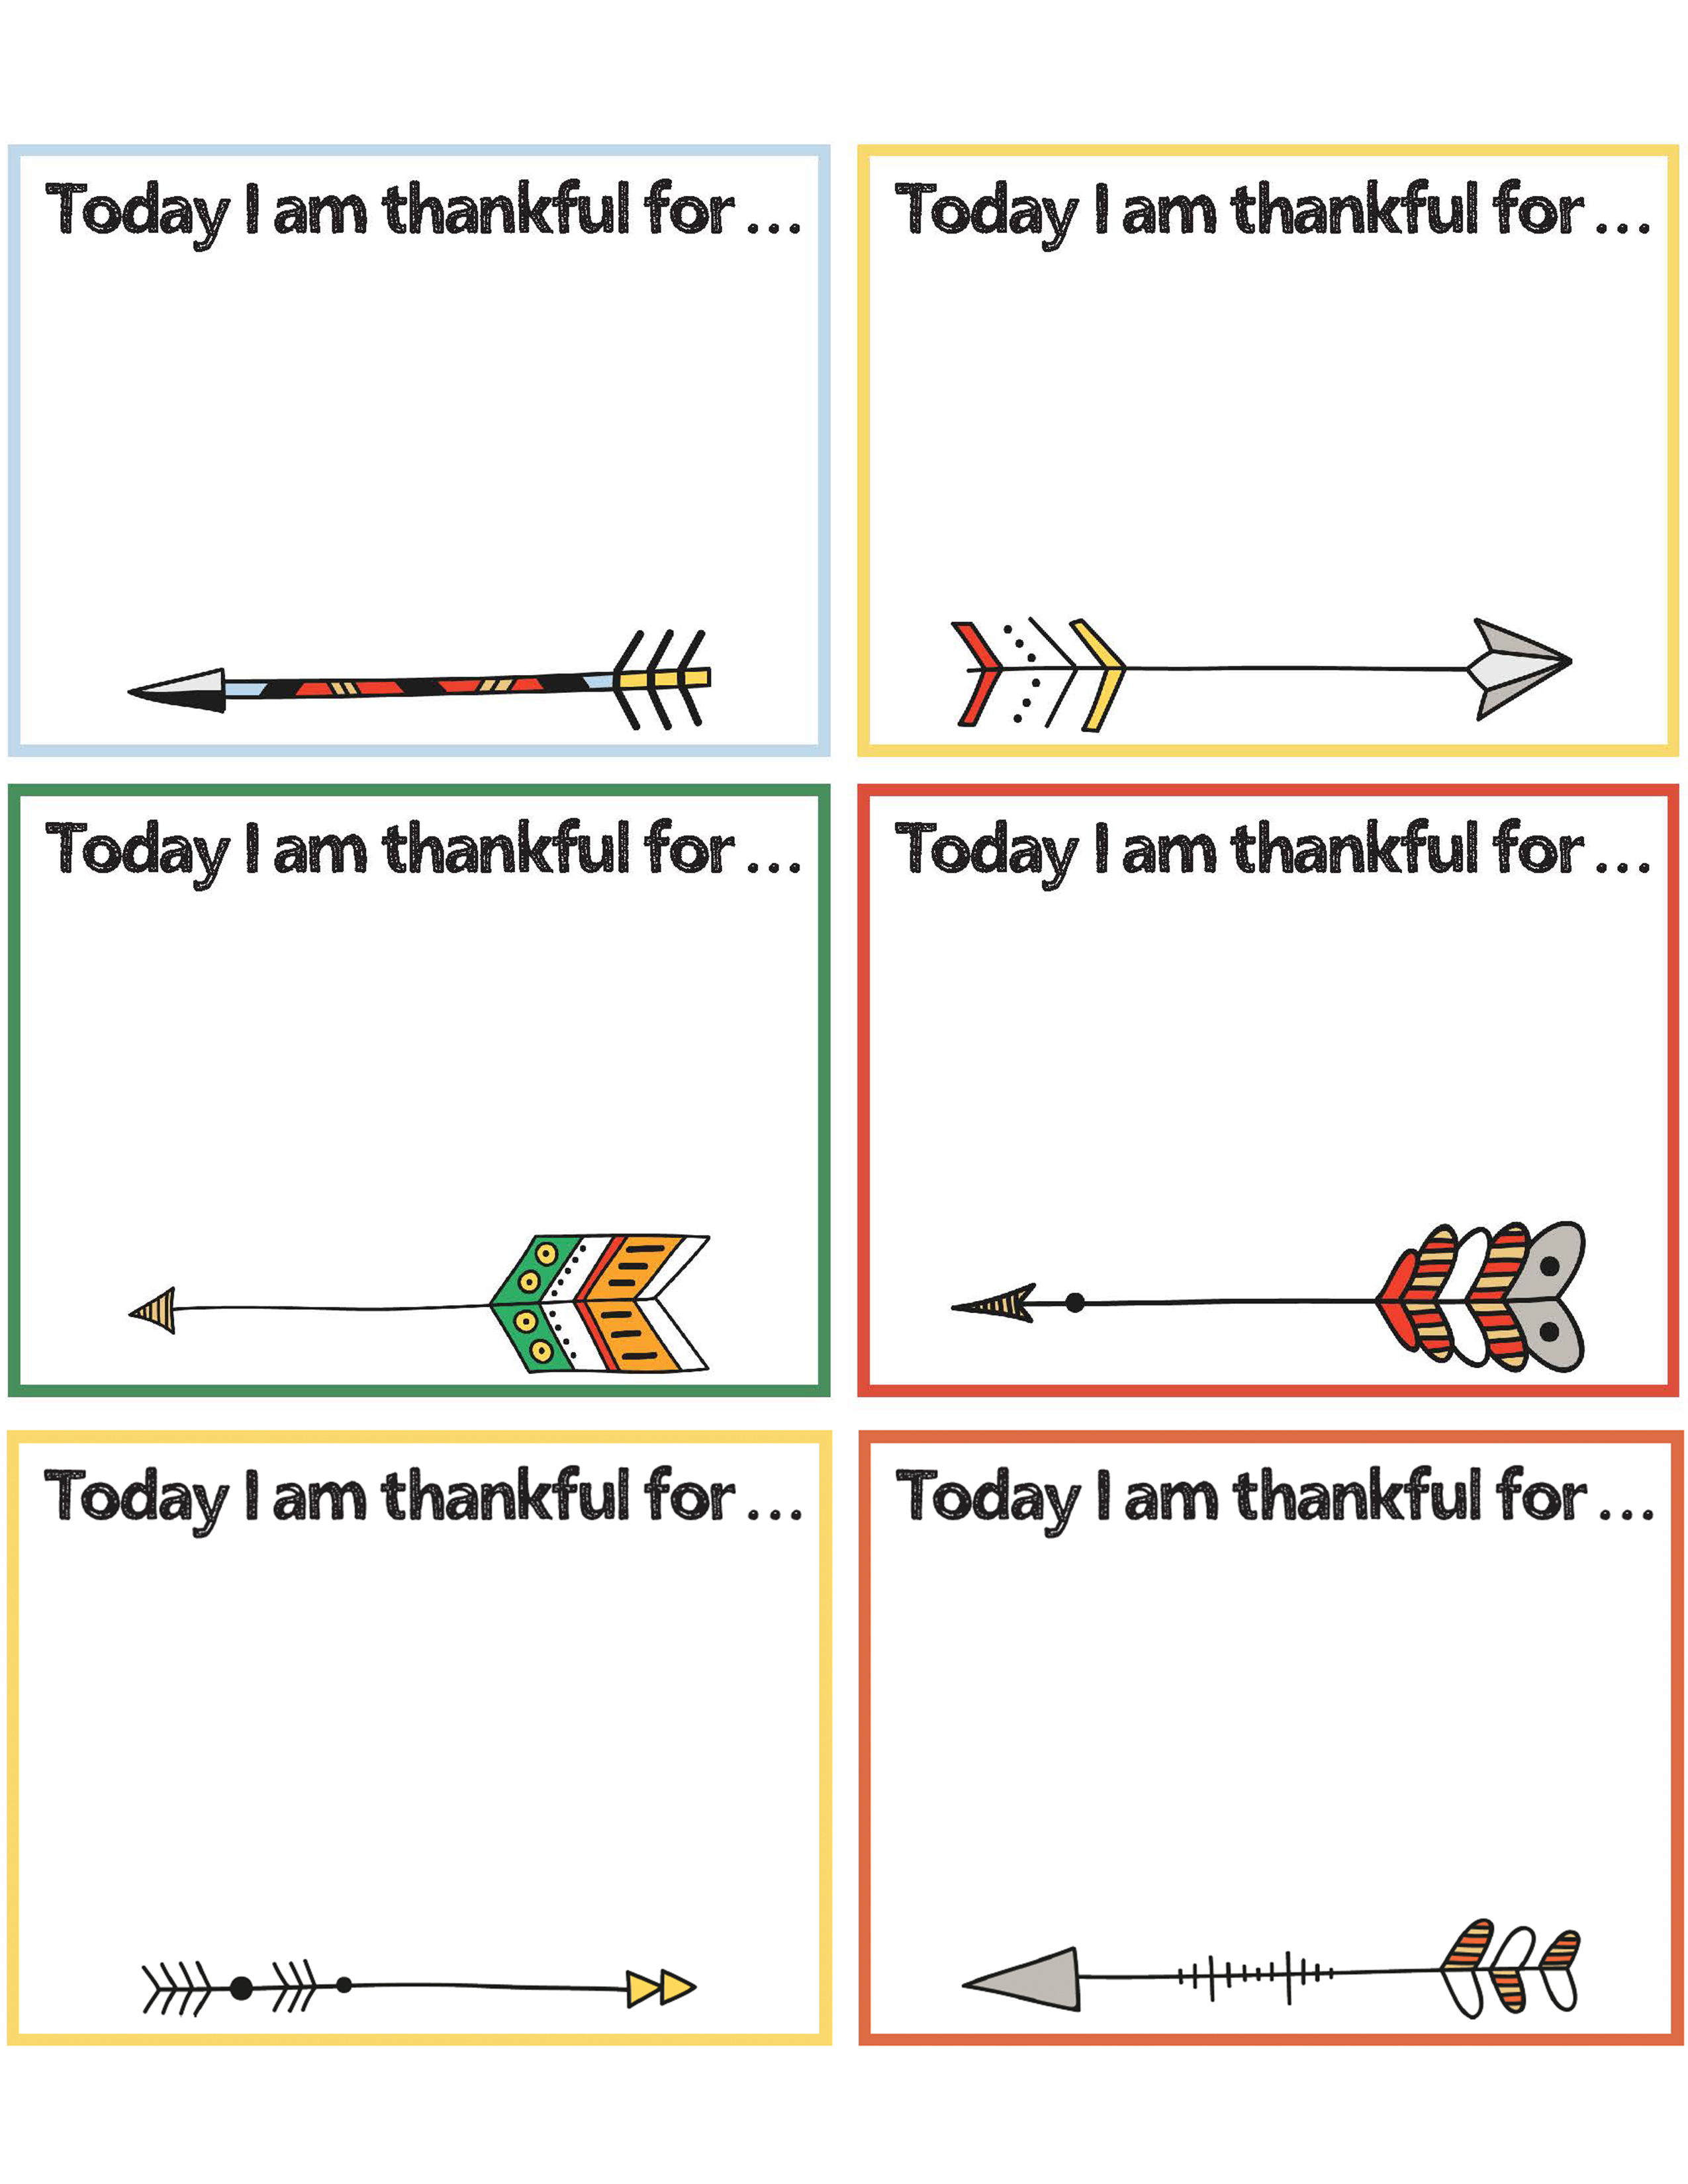 free-printable-thankful-cards-activity-for-the-family-with-printables